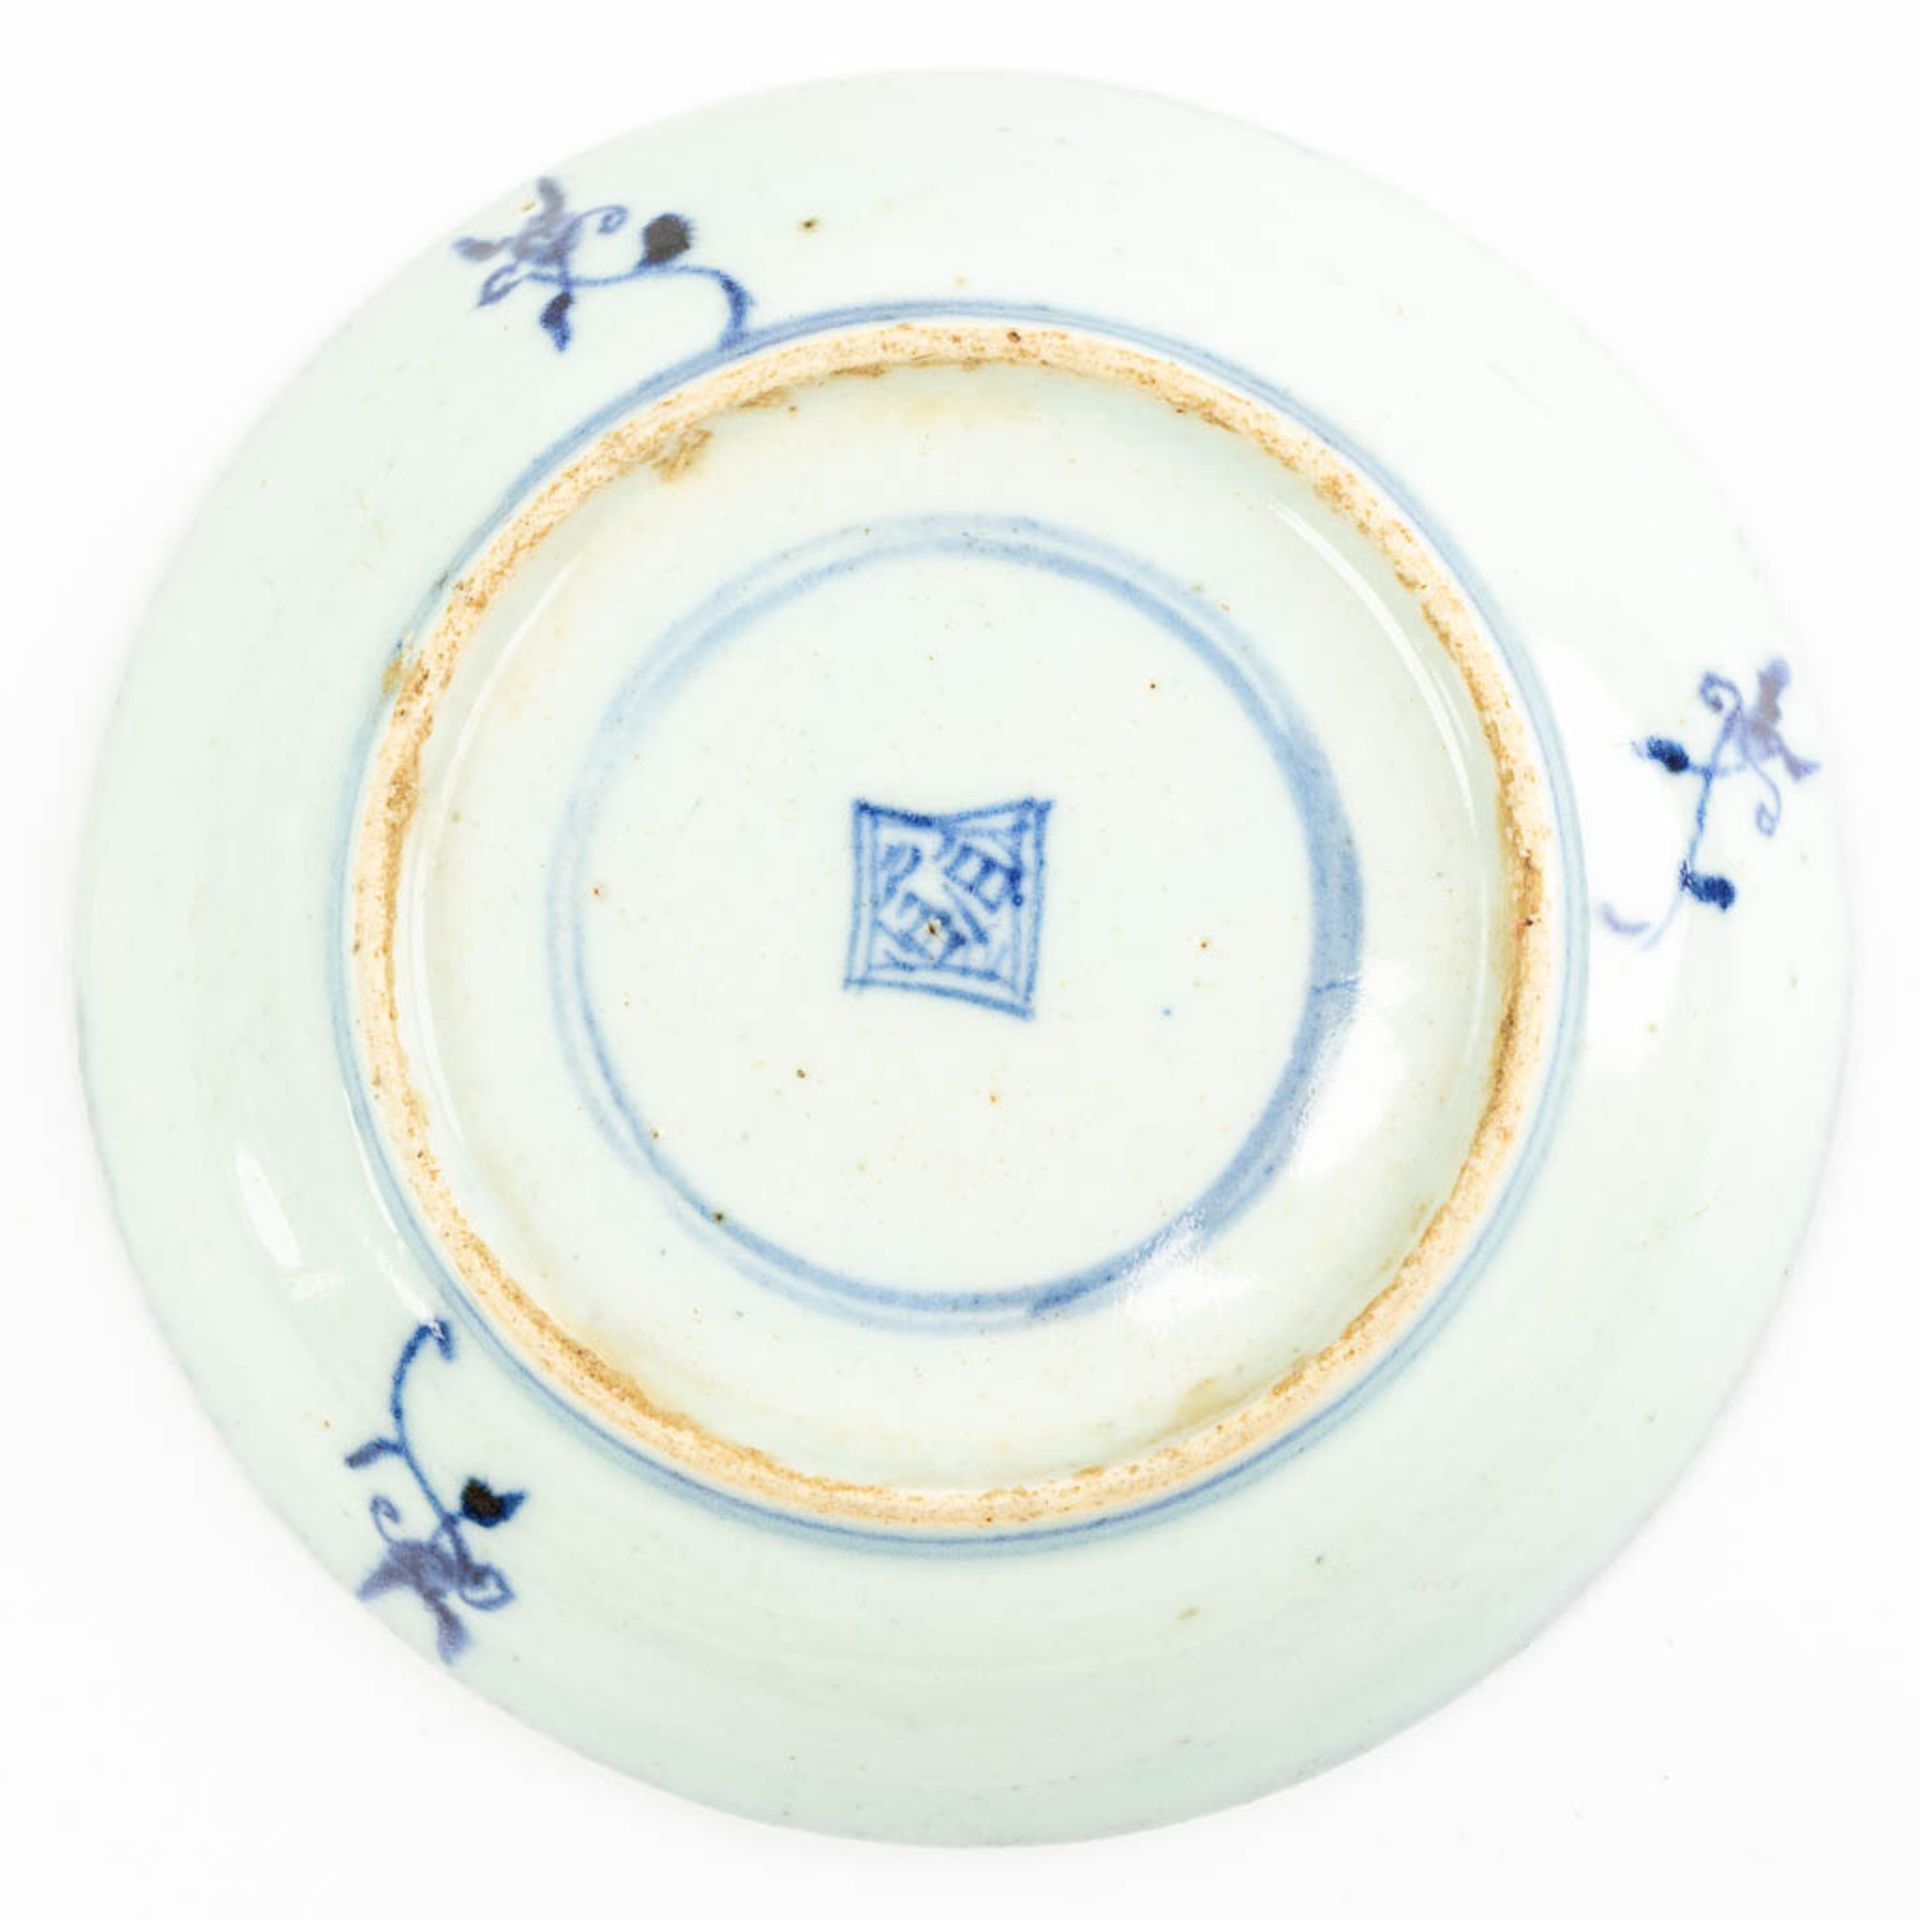 A collection of 5 plates made of Chinese porcelain with different patterns. - Image 3 of 15